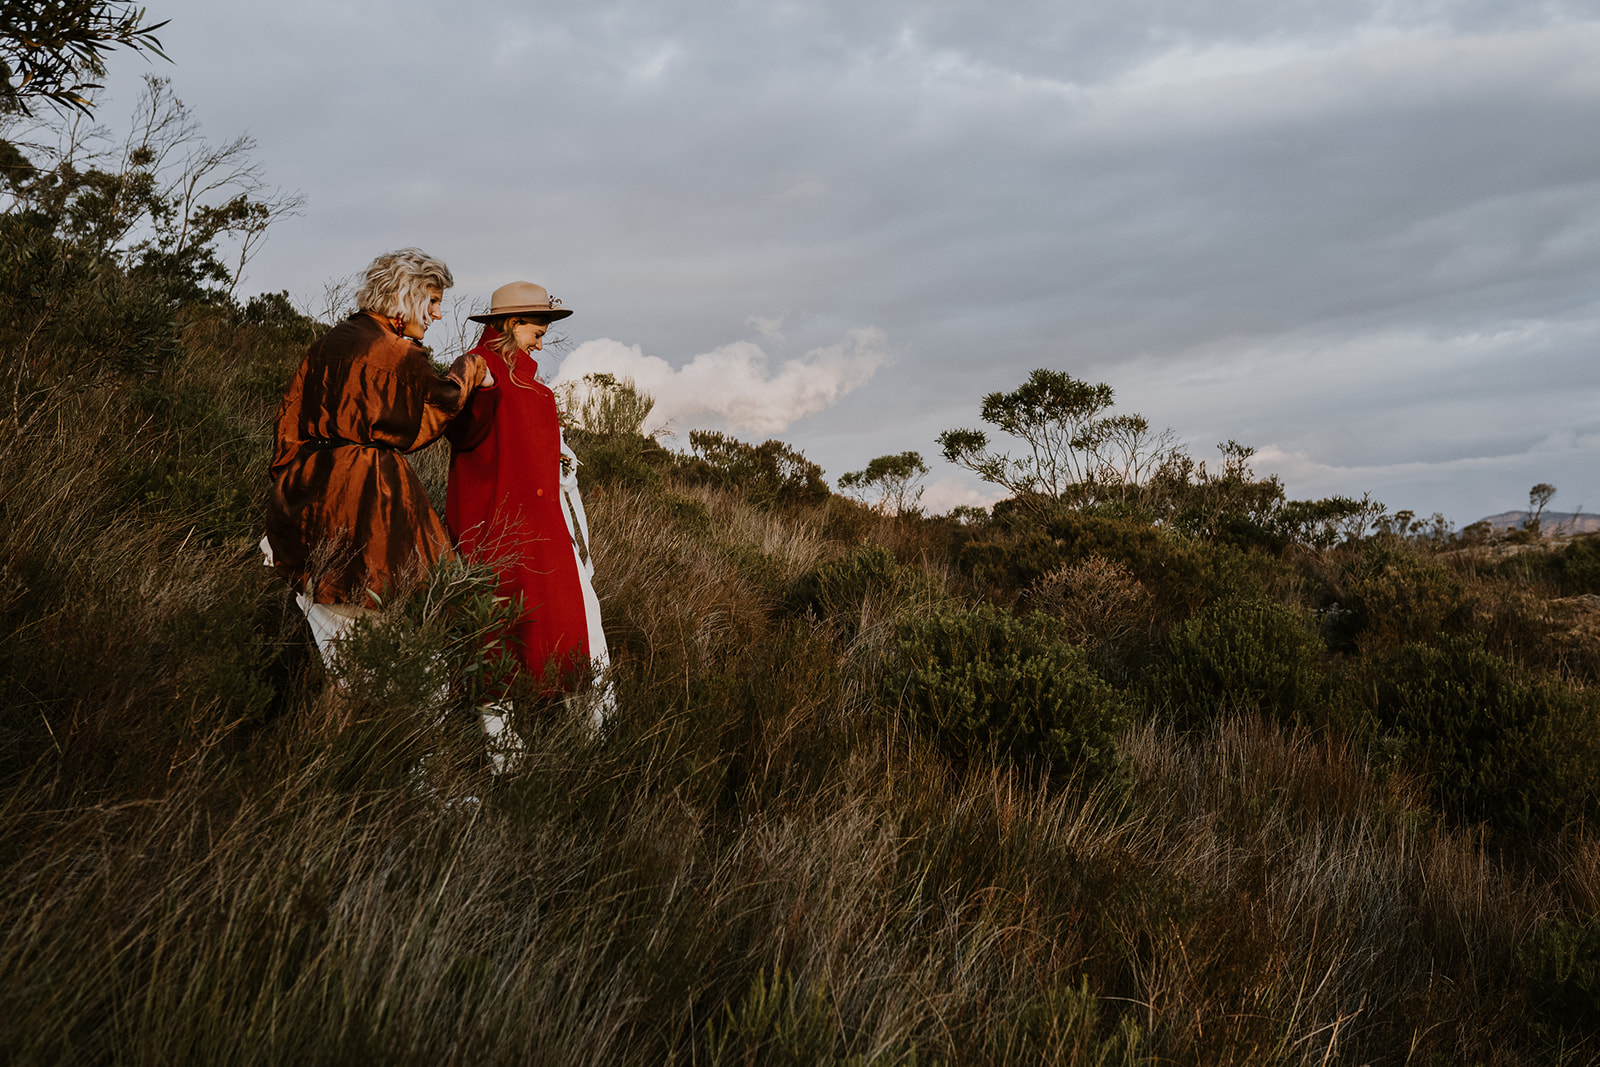 Both brides trek through the blue mountains, in colourful red overcoats as we film their intimate wedding film